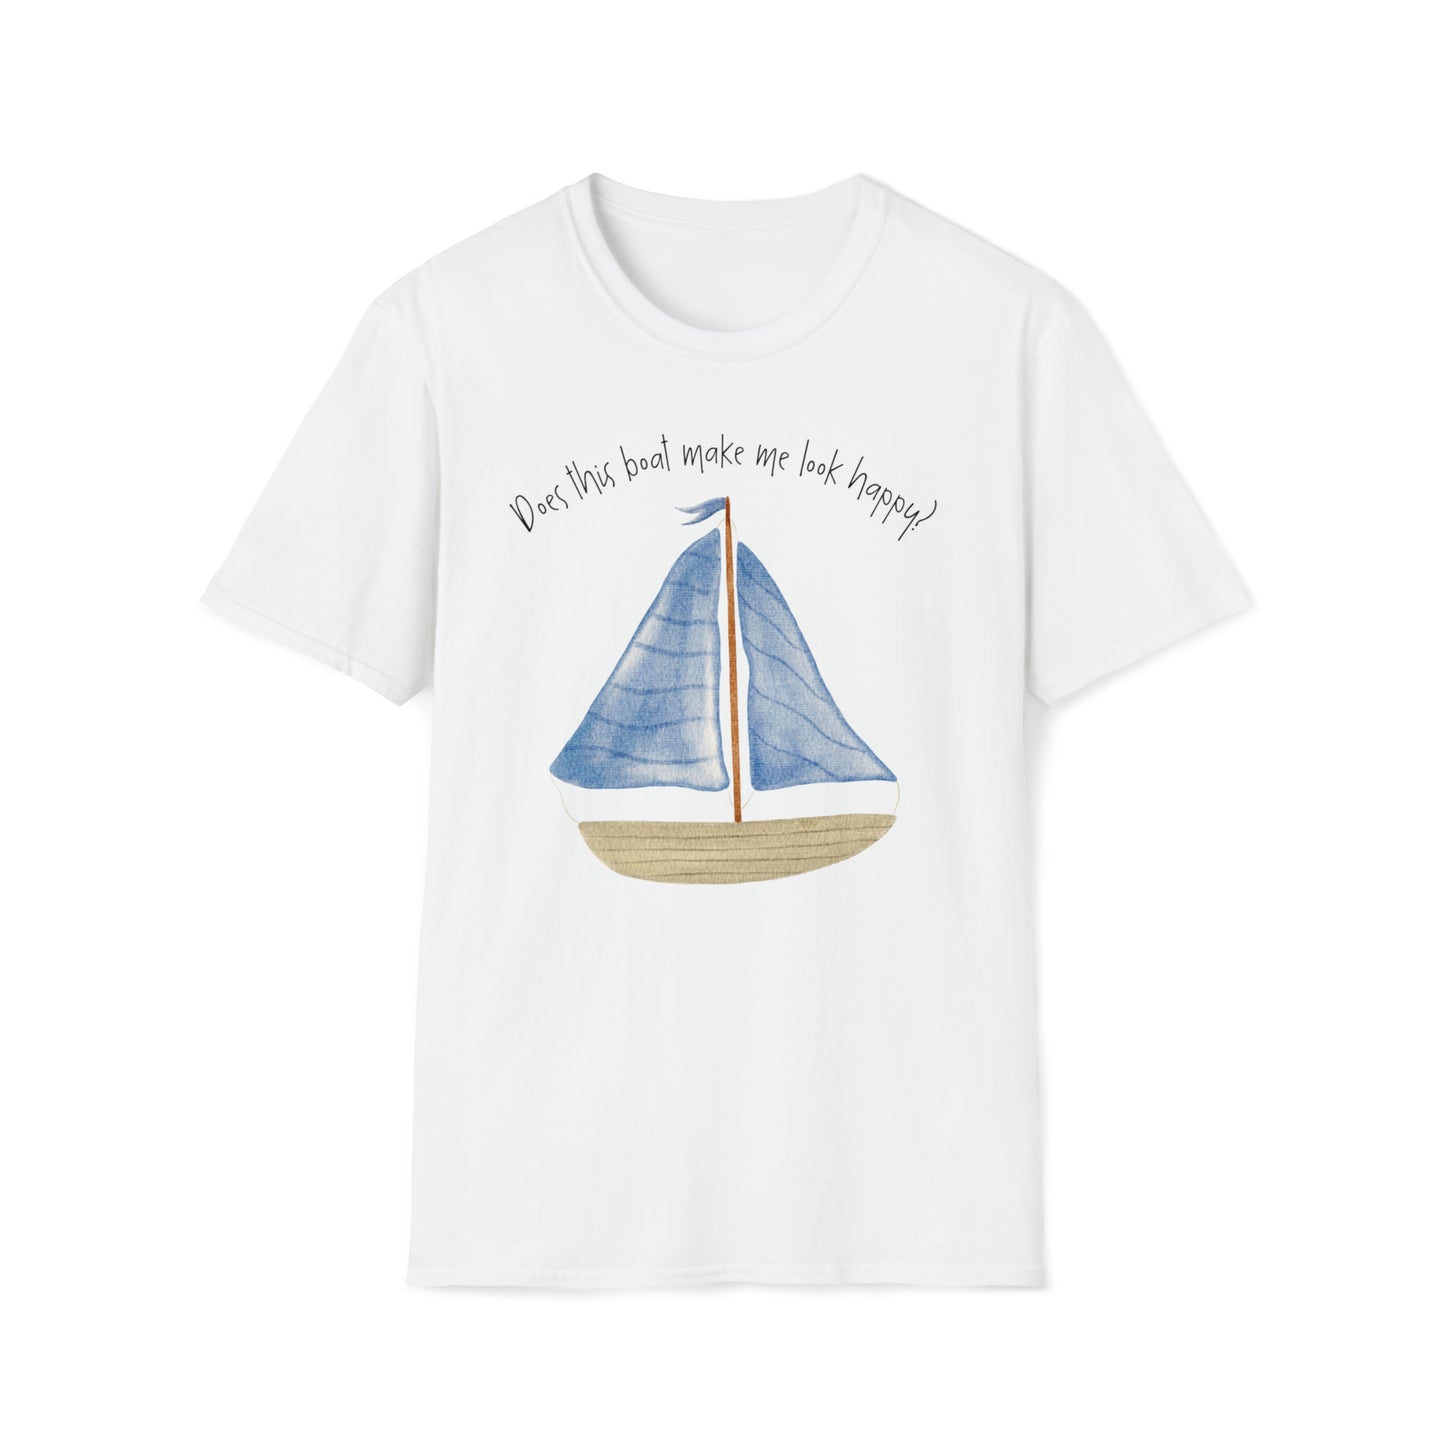 Does this boat make me look happy? Unisex Softstyle T-Shirt